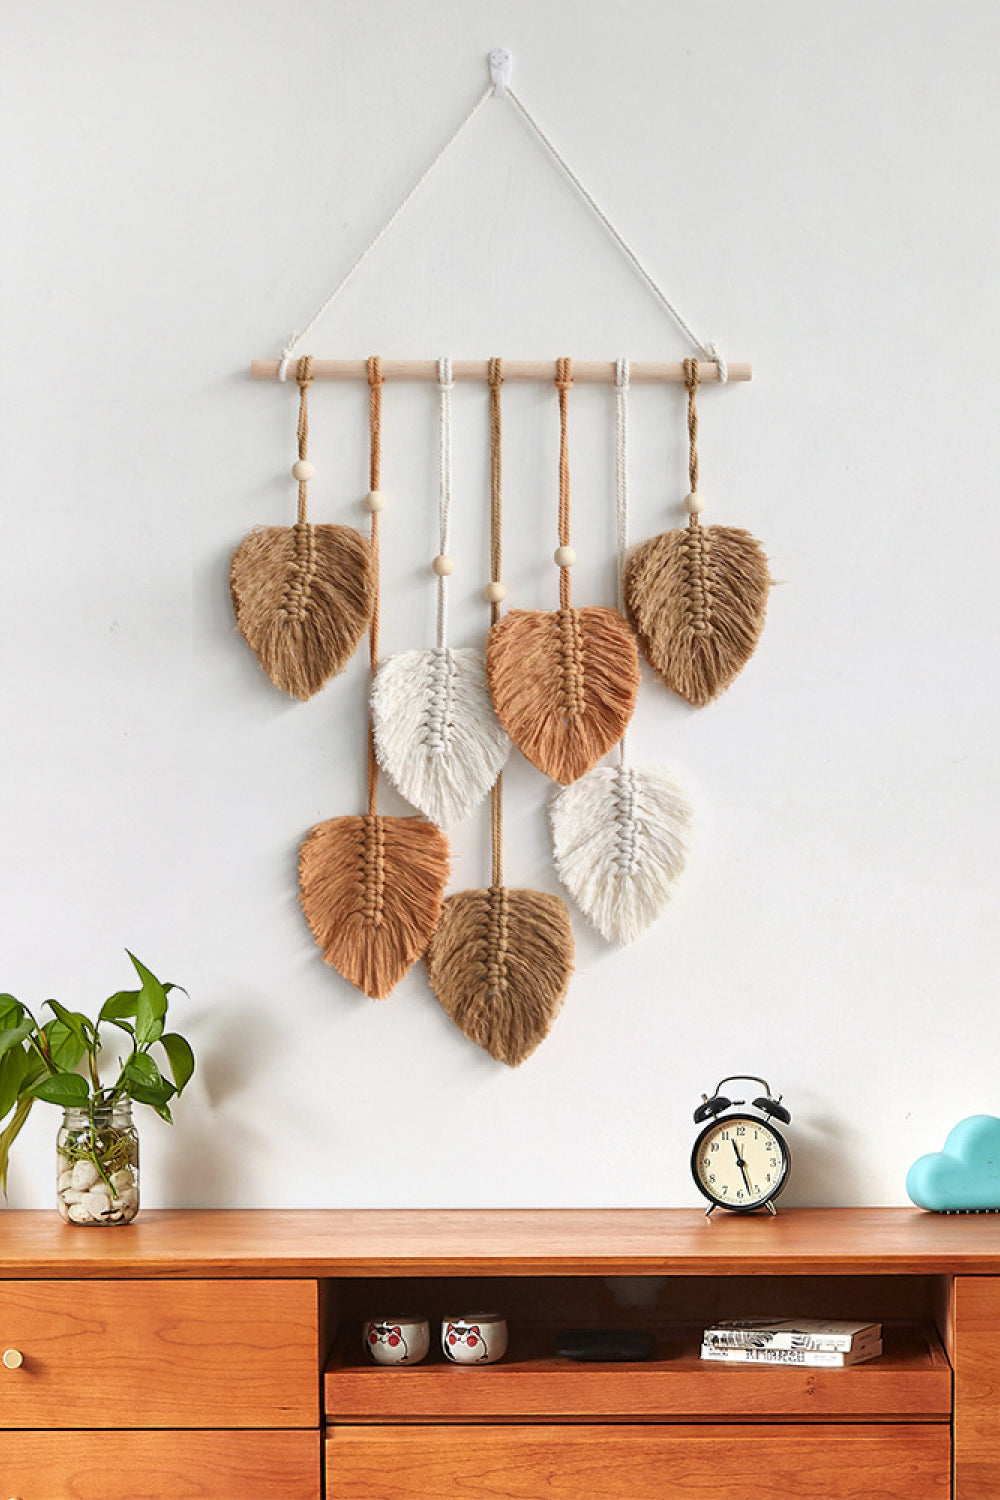 Macrame Leaf Bead Wall Hanging Available in 3 Color Options